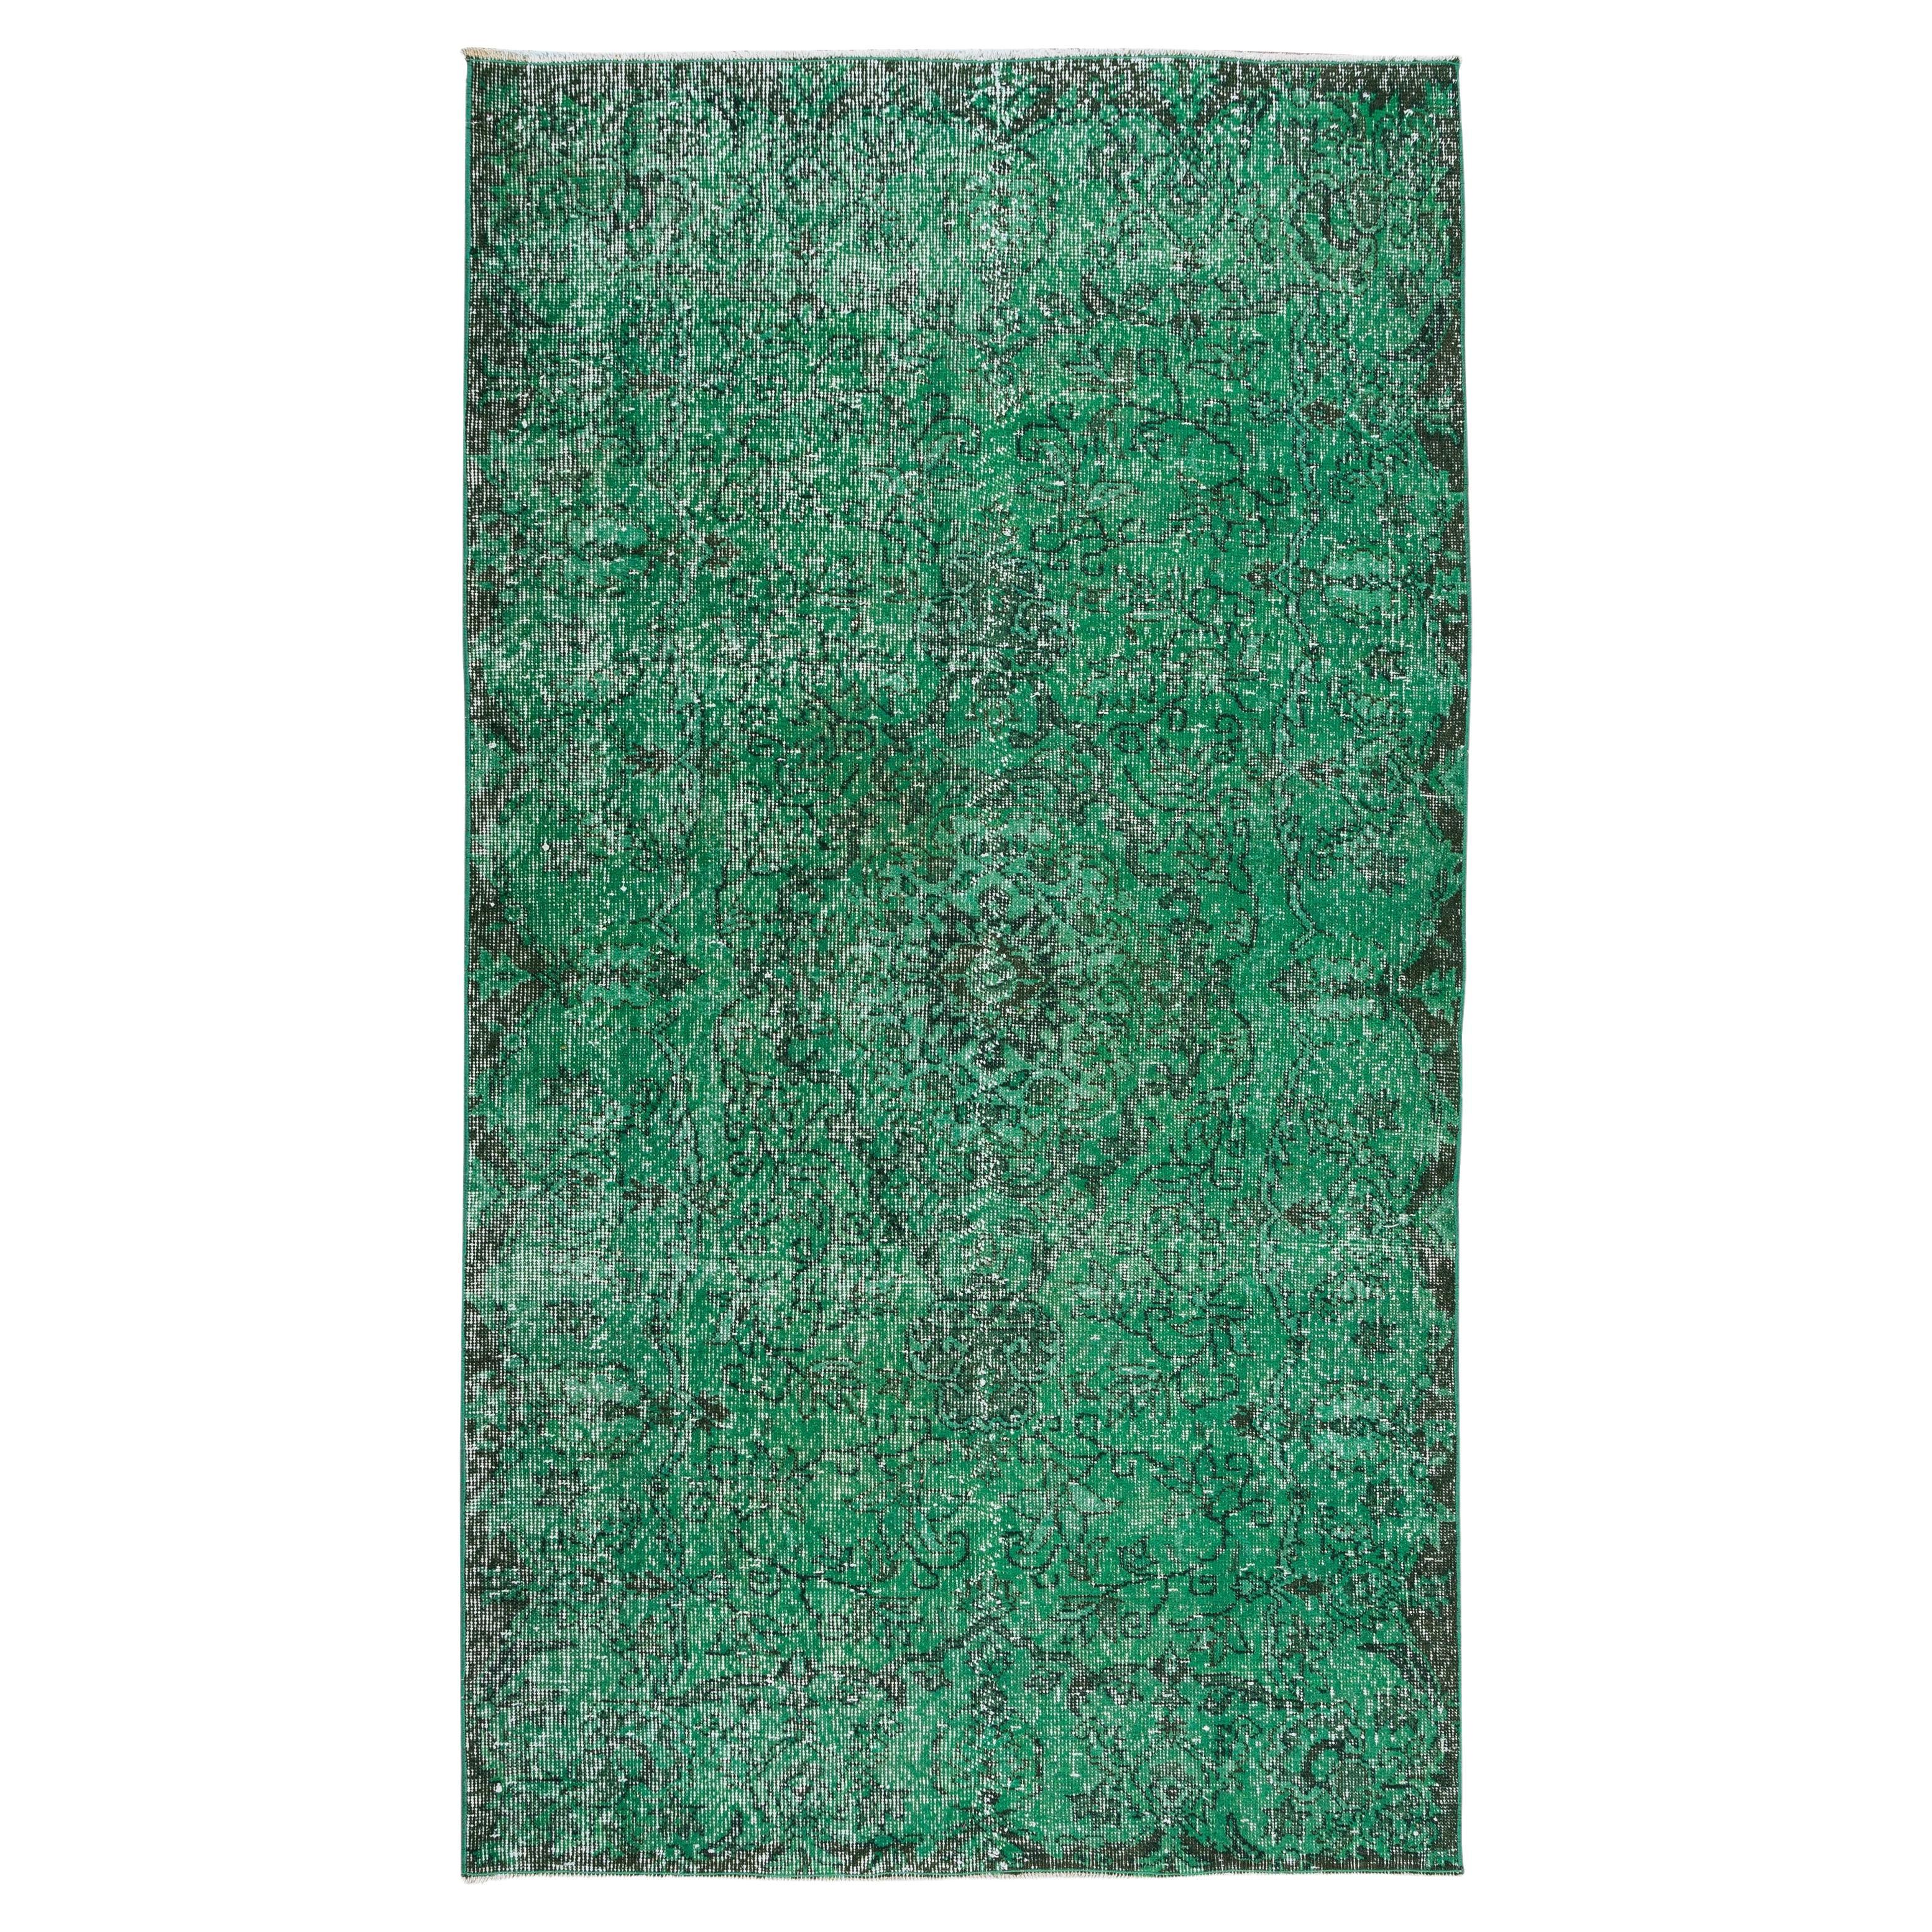 4x7.3 Ft Vintage Hand Knotted Turkish Rug Re-Dyed in Green 4 Modern Interiors For Sale